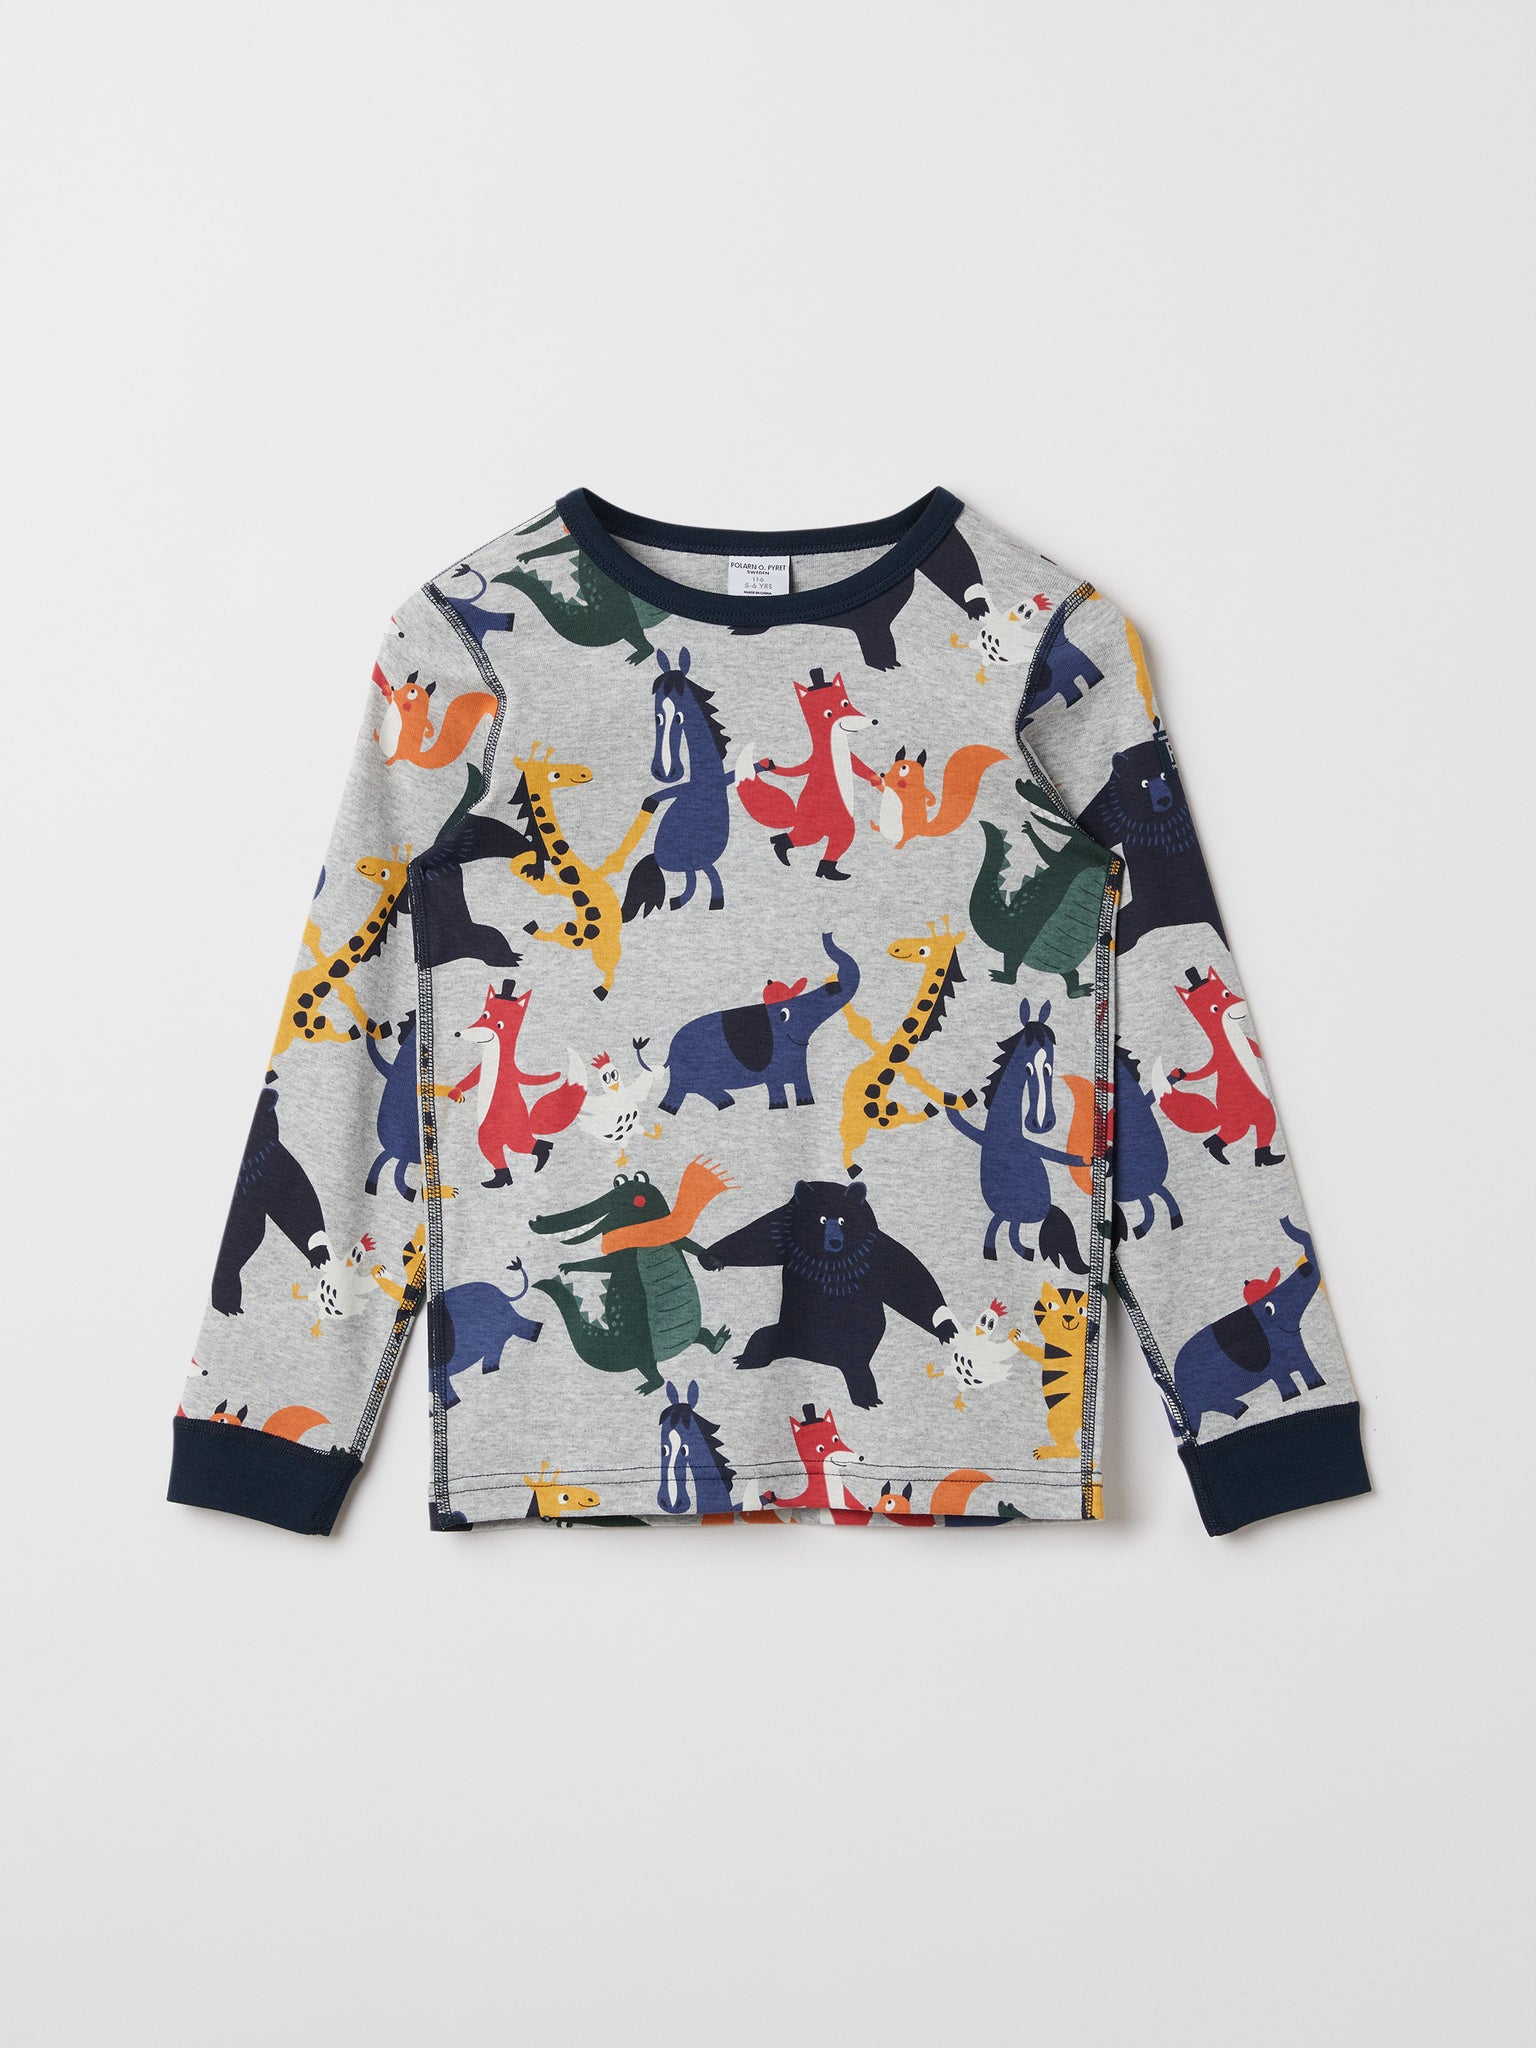 Organic Cotton Animal Print Kids Top from the Polarn O. Pyret kidswear collection. The best ethical kids clothes